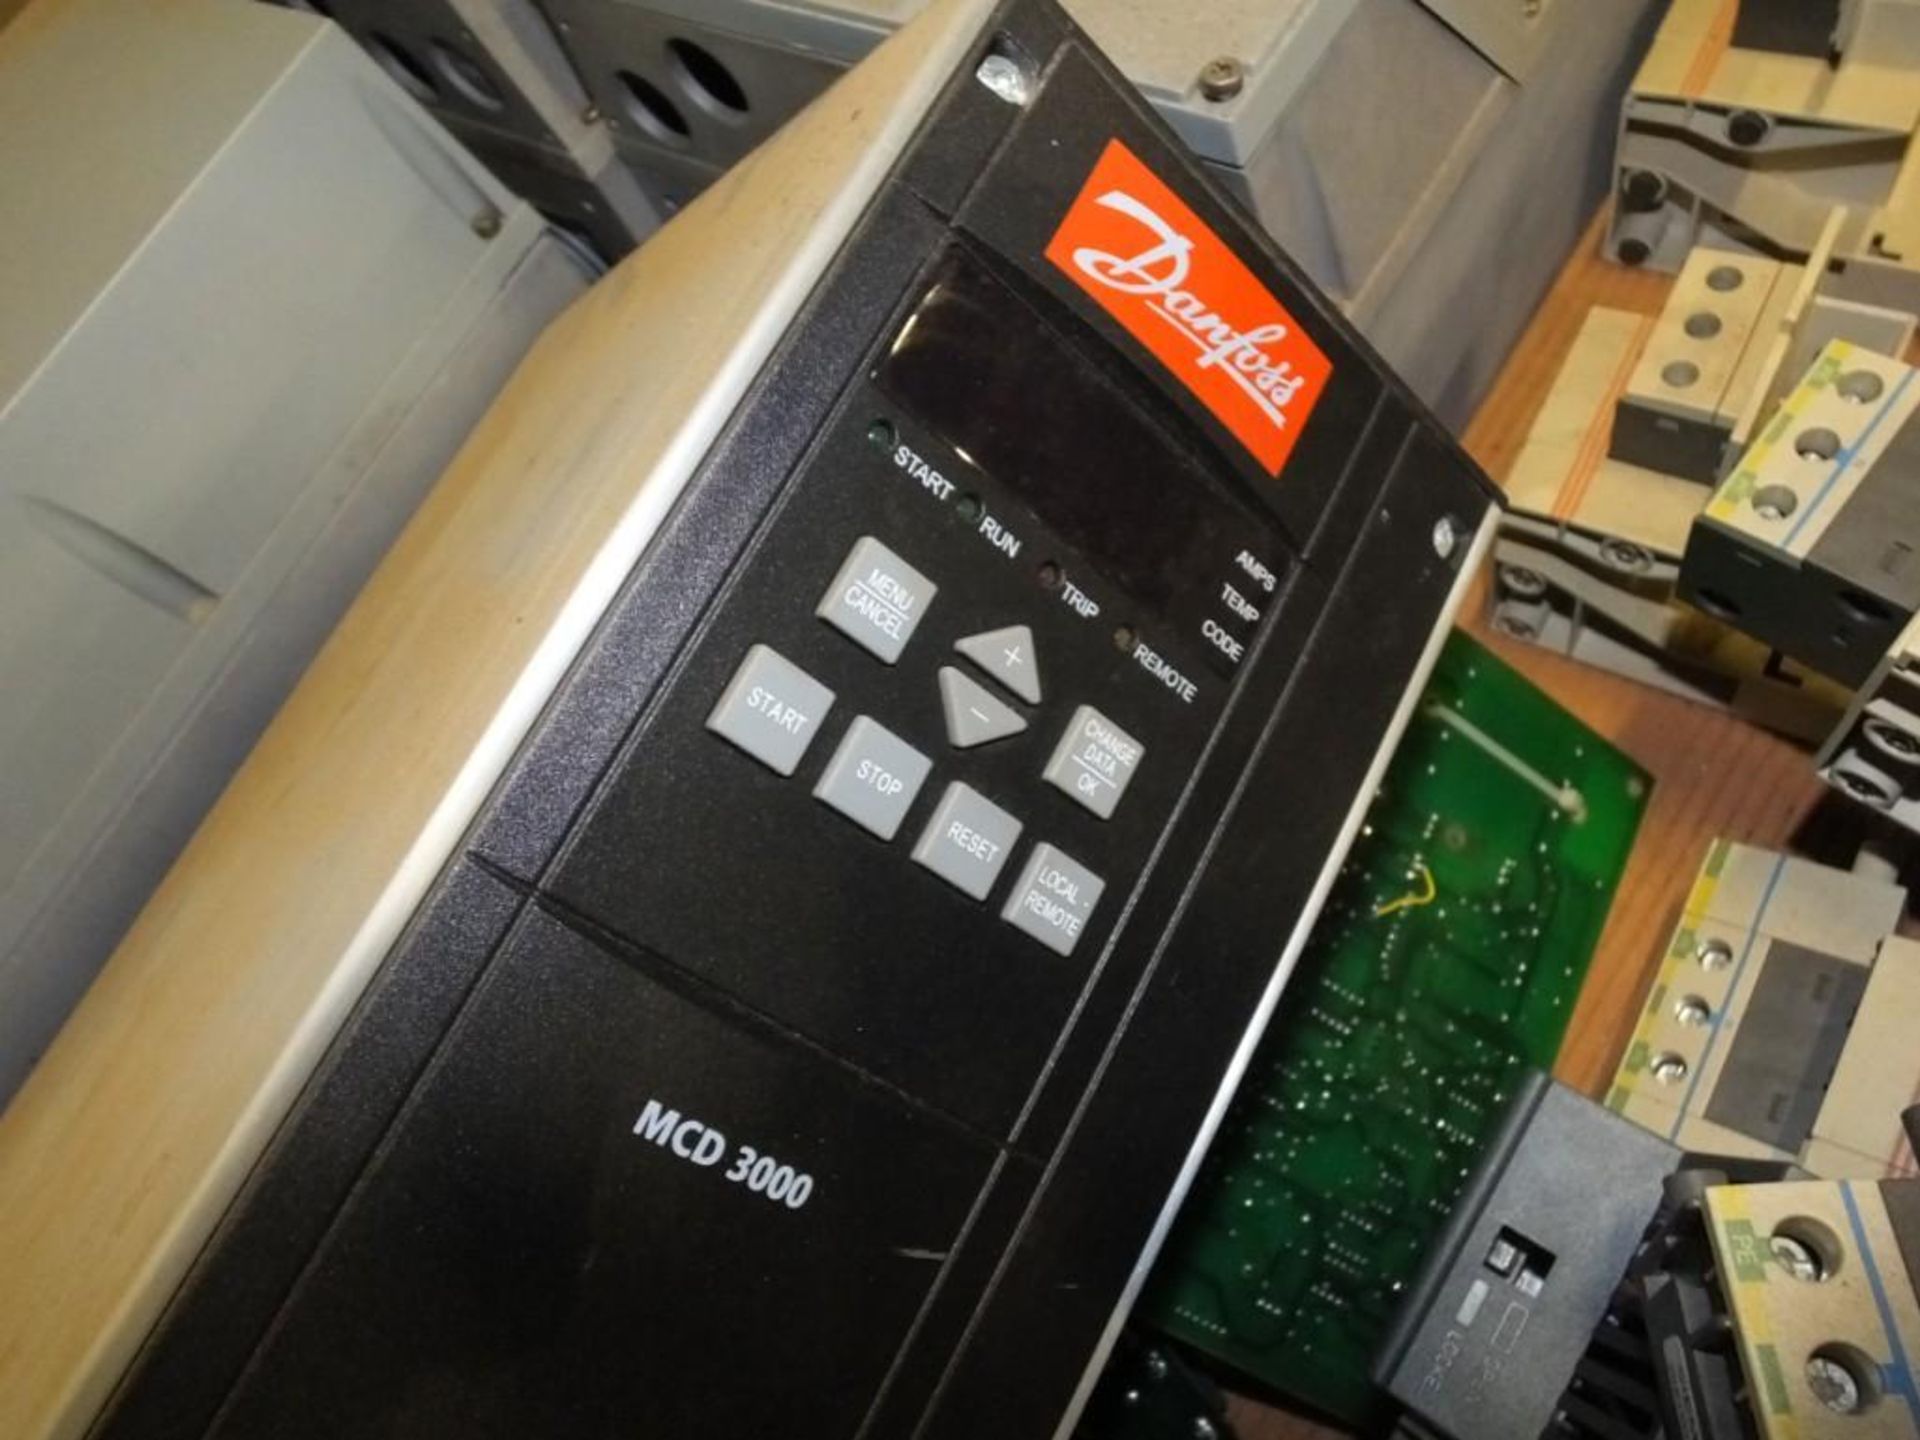 Danfoss VLT Automation Drives, MCD3000 Drive, and Components - Image 3 of 5